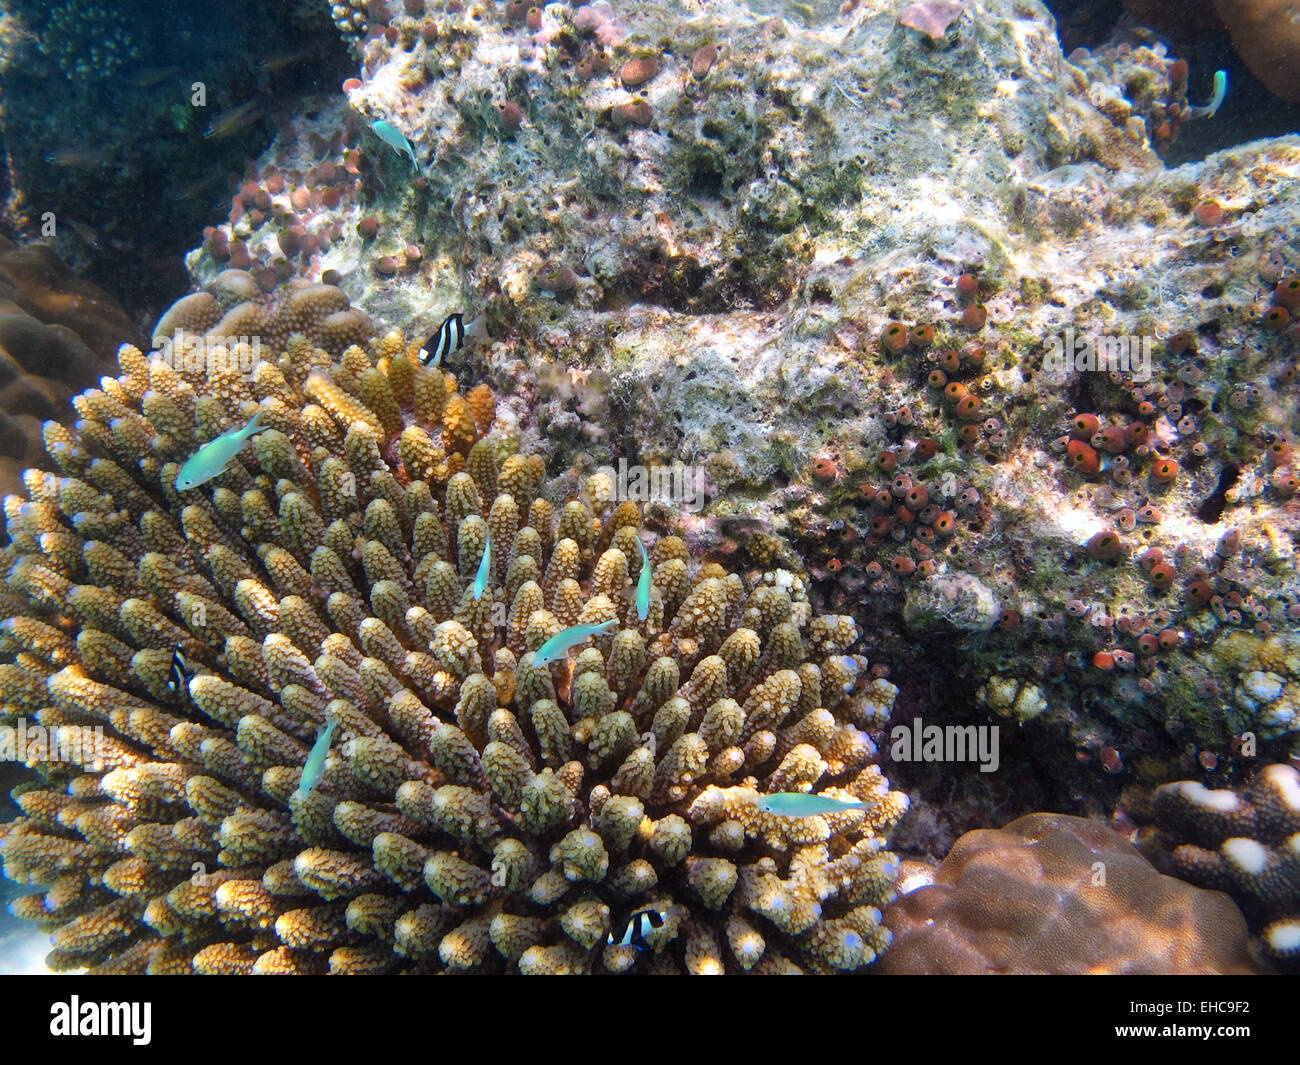 A  shoal of Peacock damselfish and a Humbug Dascyllus swim over a coral reef in the Maldives Stock Photo